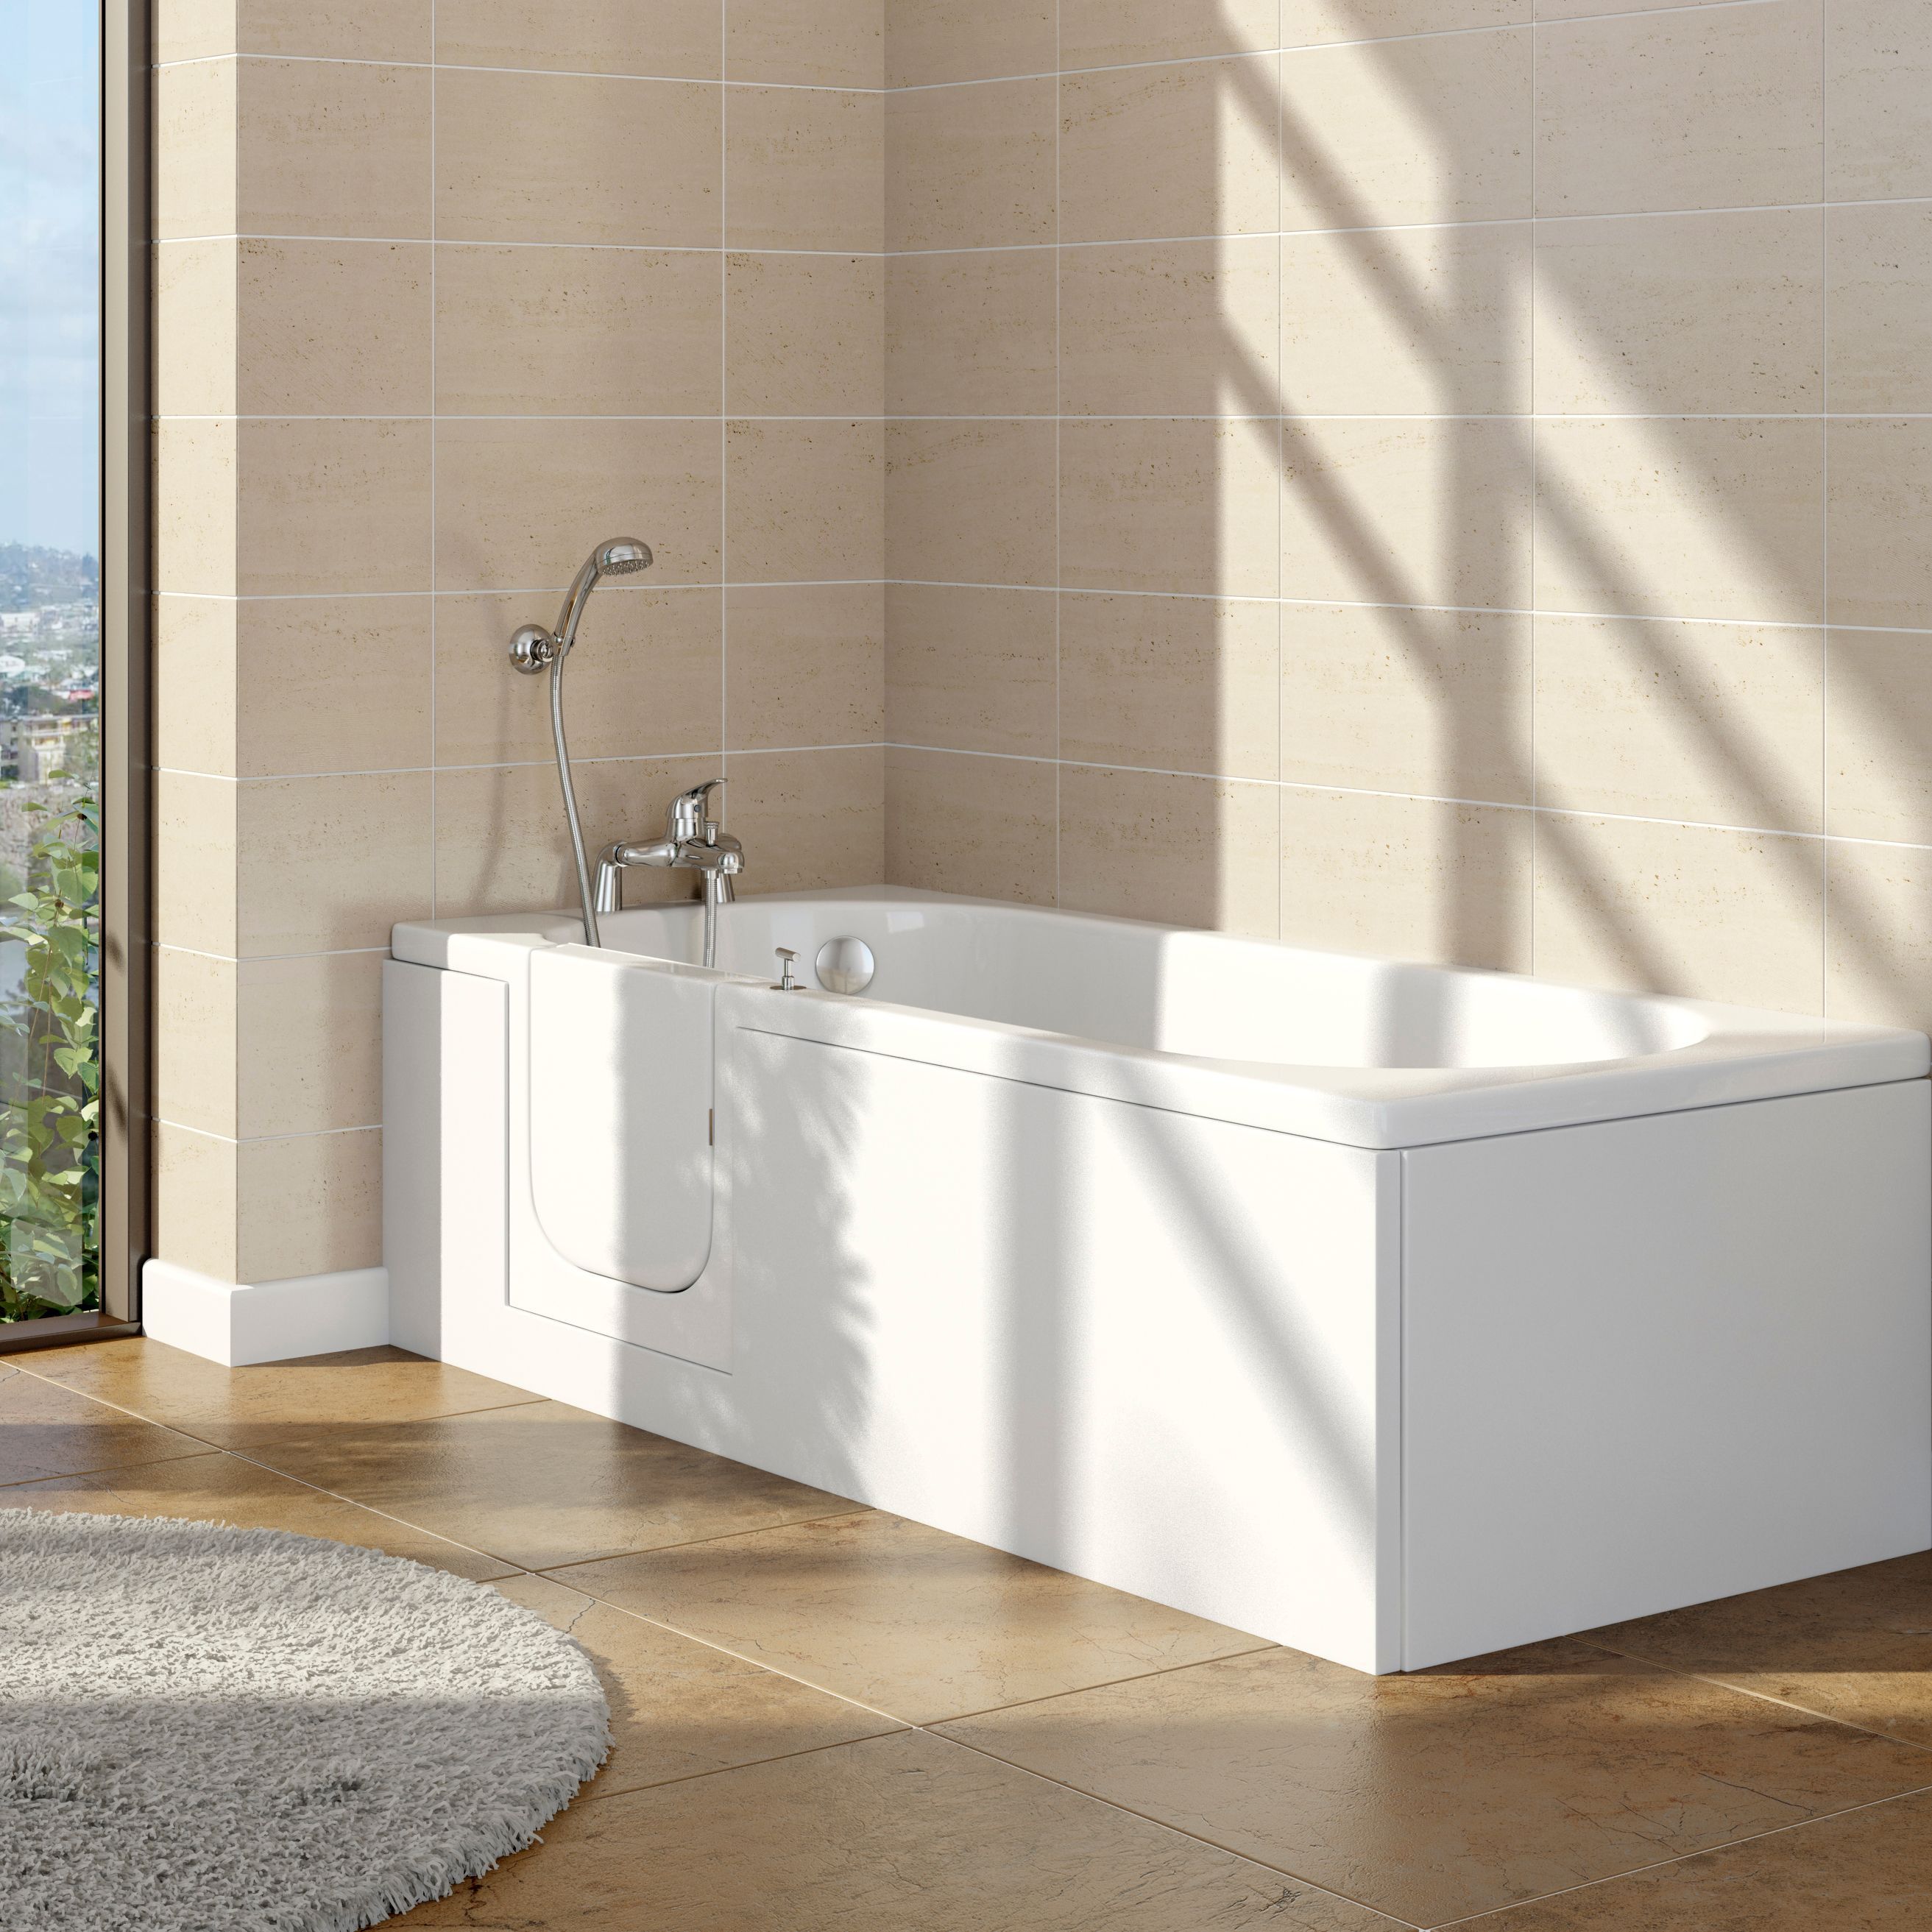 Cooke & Lewis White Easy-access Acrylic Rectangular Right-handed Bath (L)1700mm (W)700mm